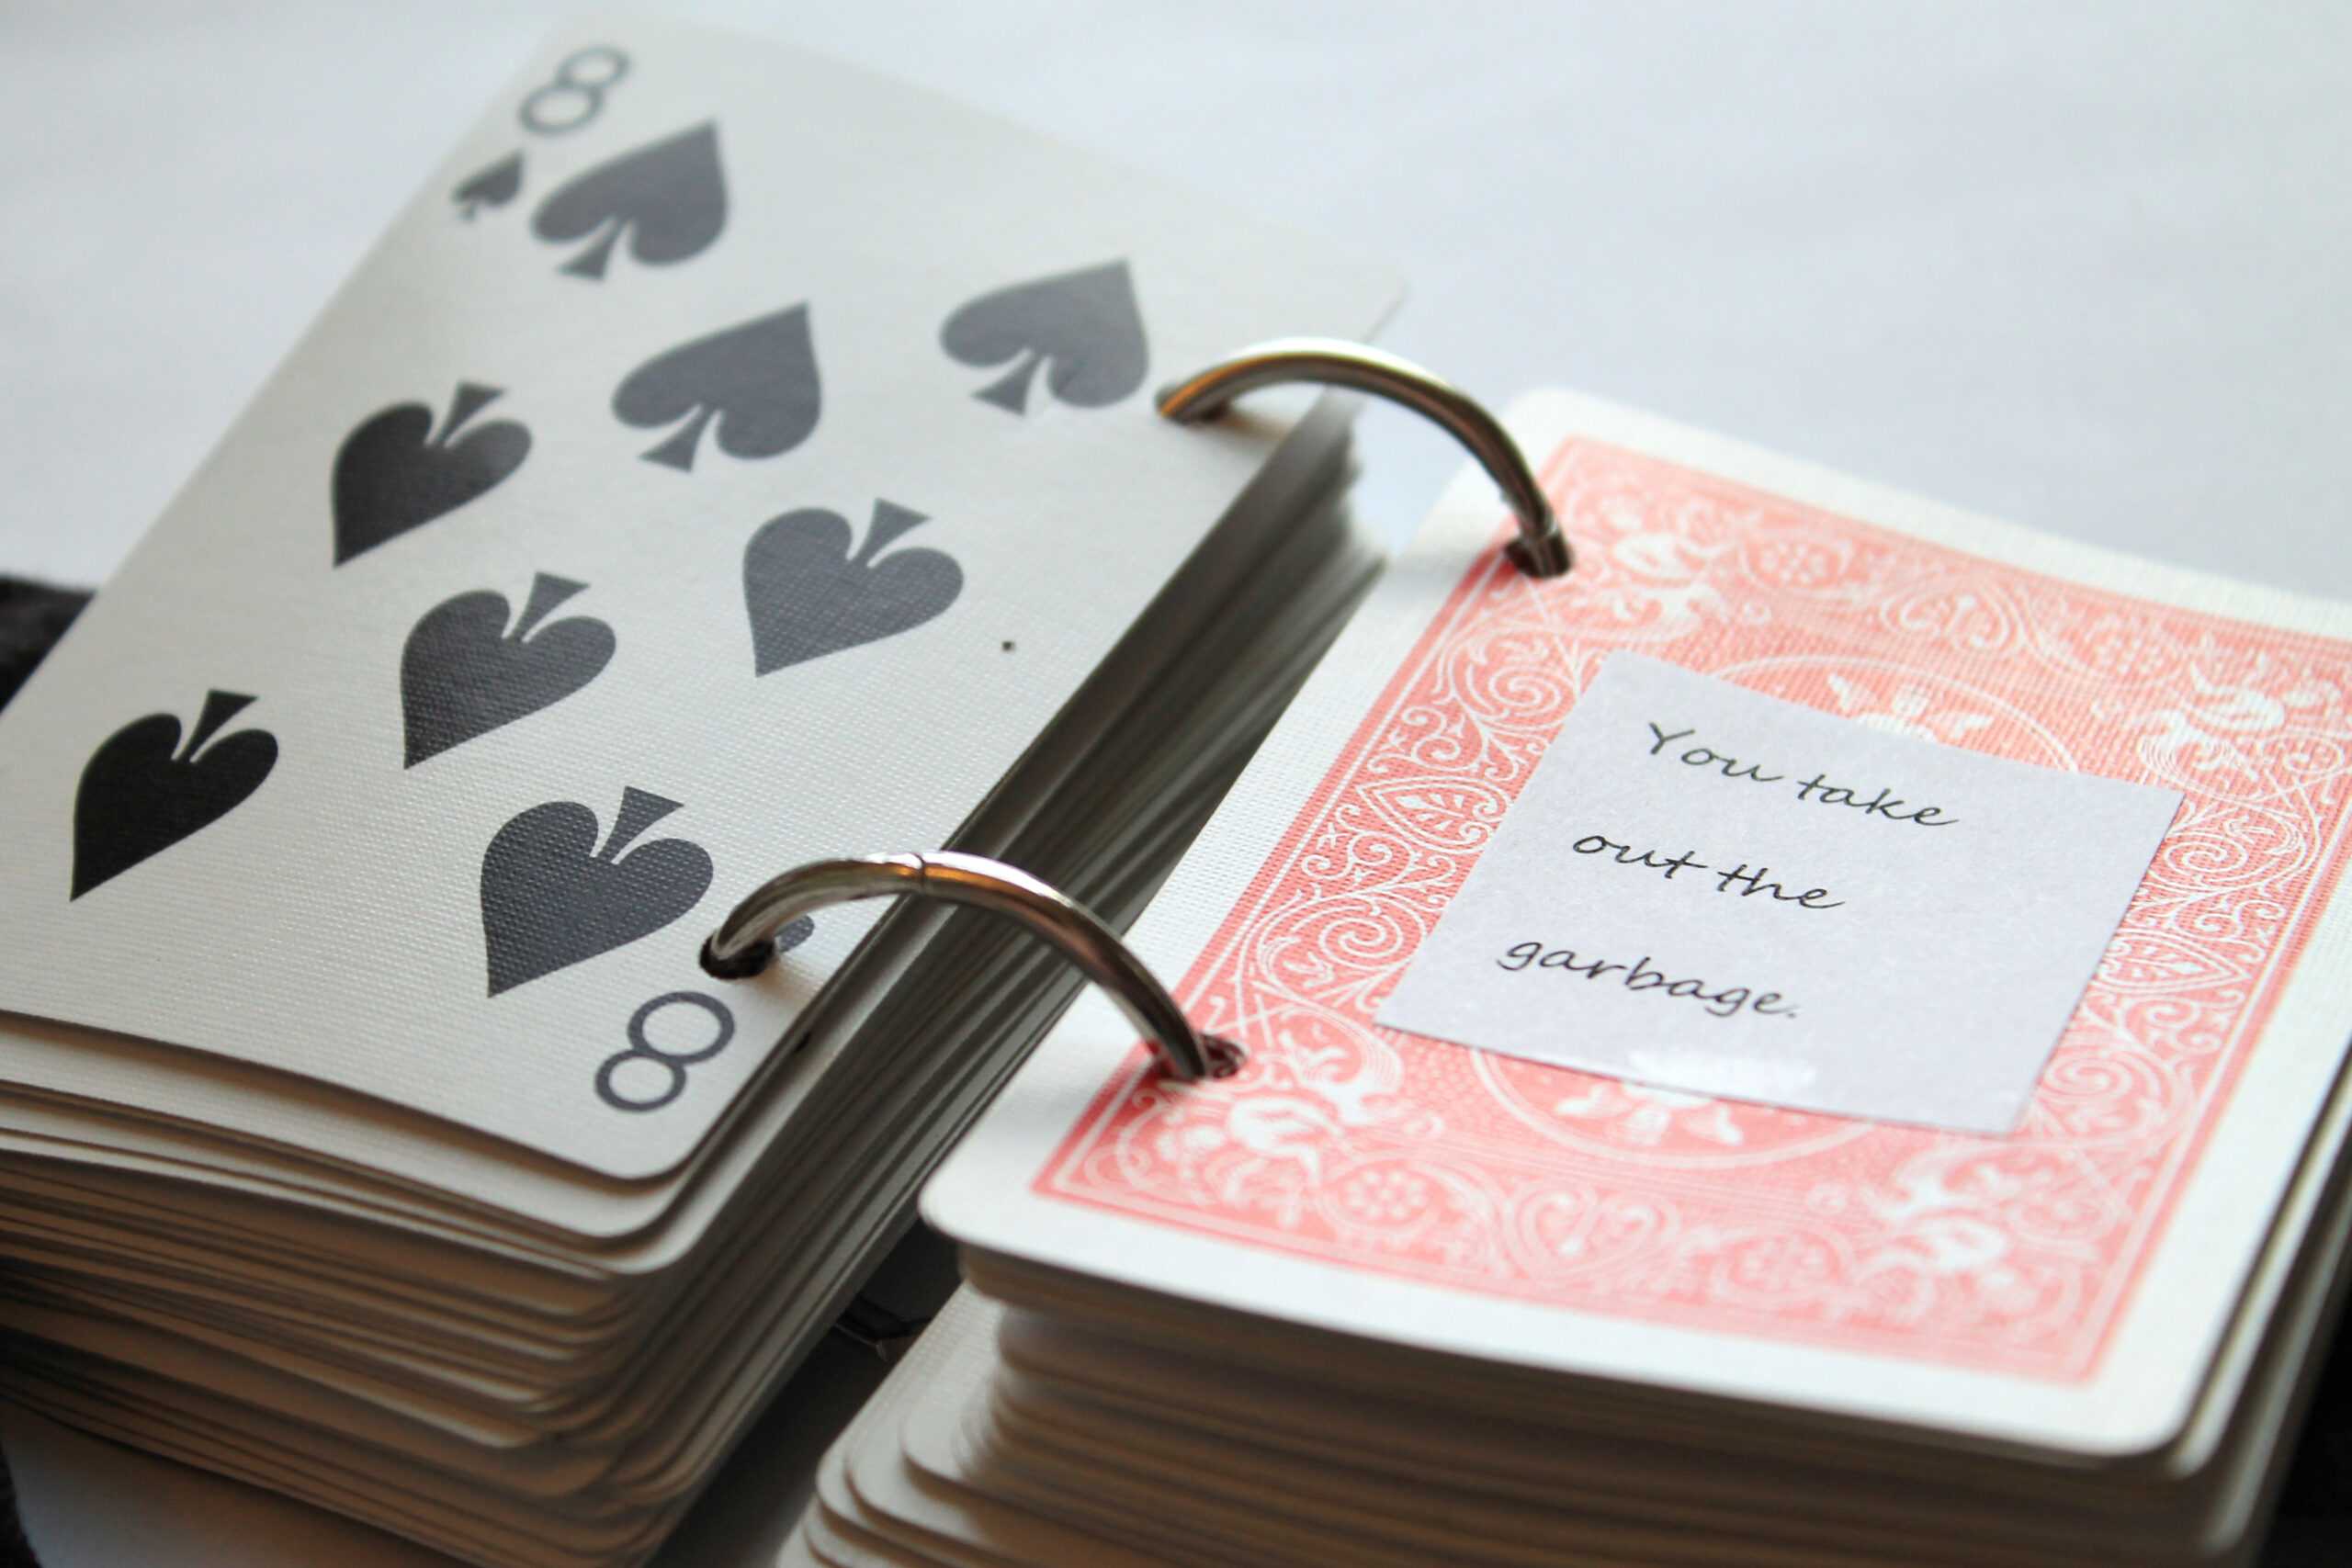 52 Reasons I Love You – Playing Card Book Tutorial Inside 52 Things I Love About You Deck Of Cards Template